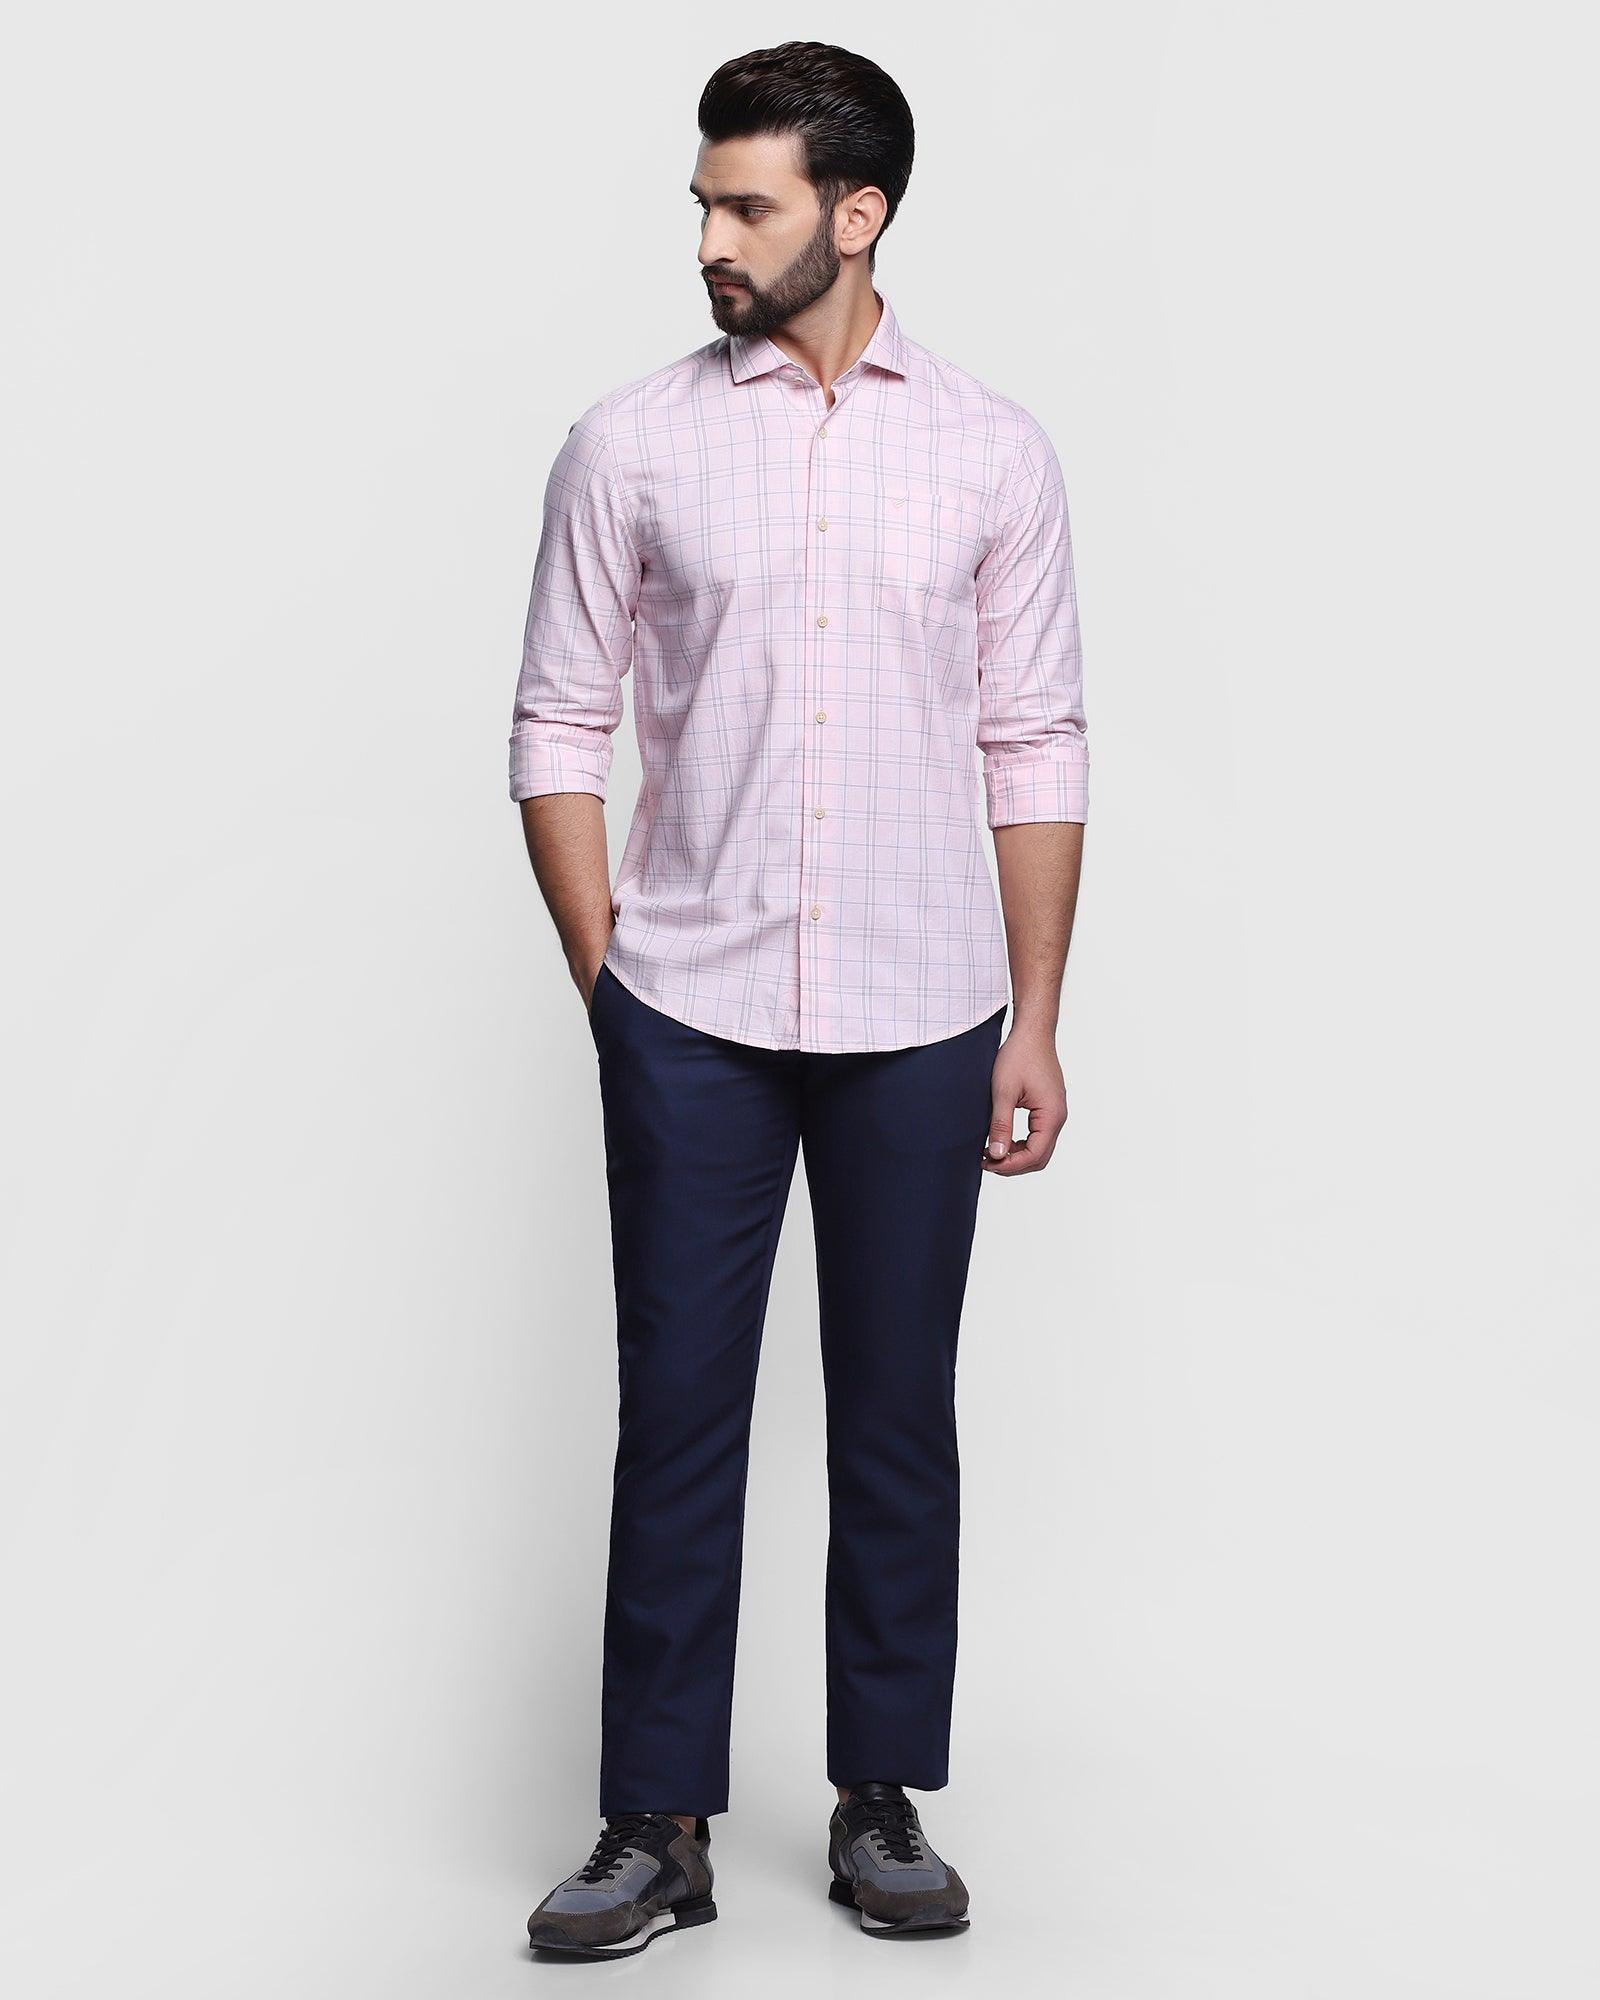 Stylish men's look of a painted pink shirt and white trousers | MEN'S VECTOR